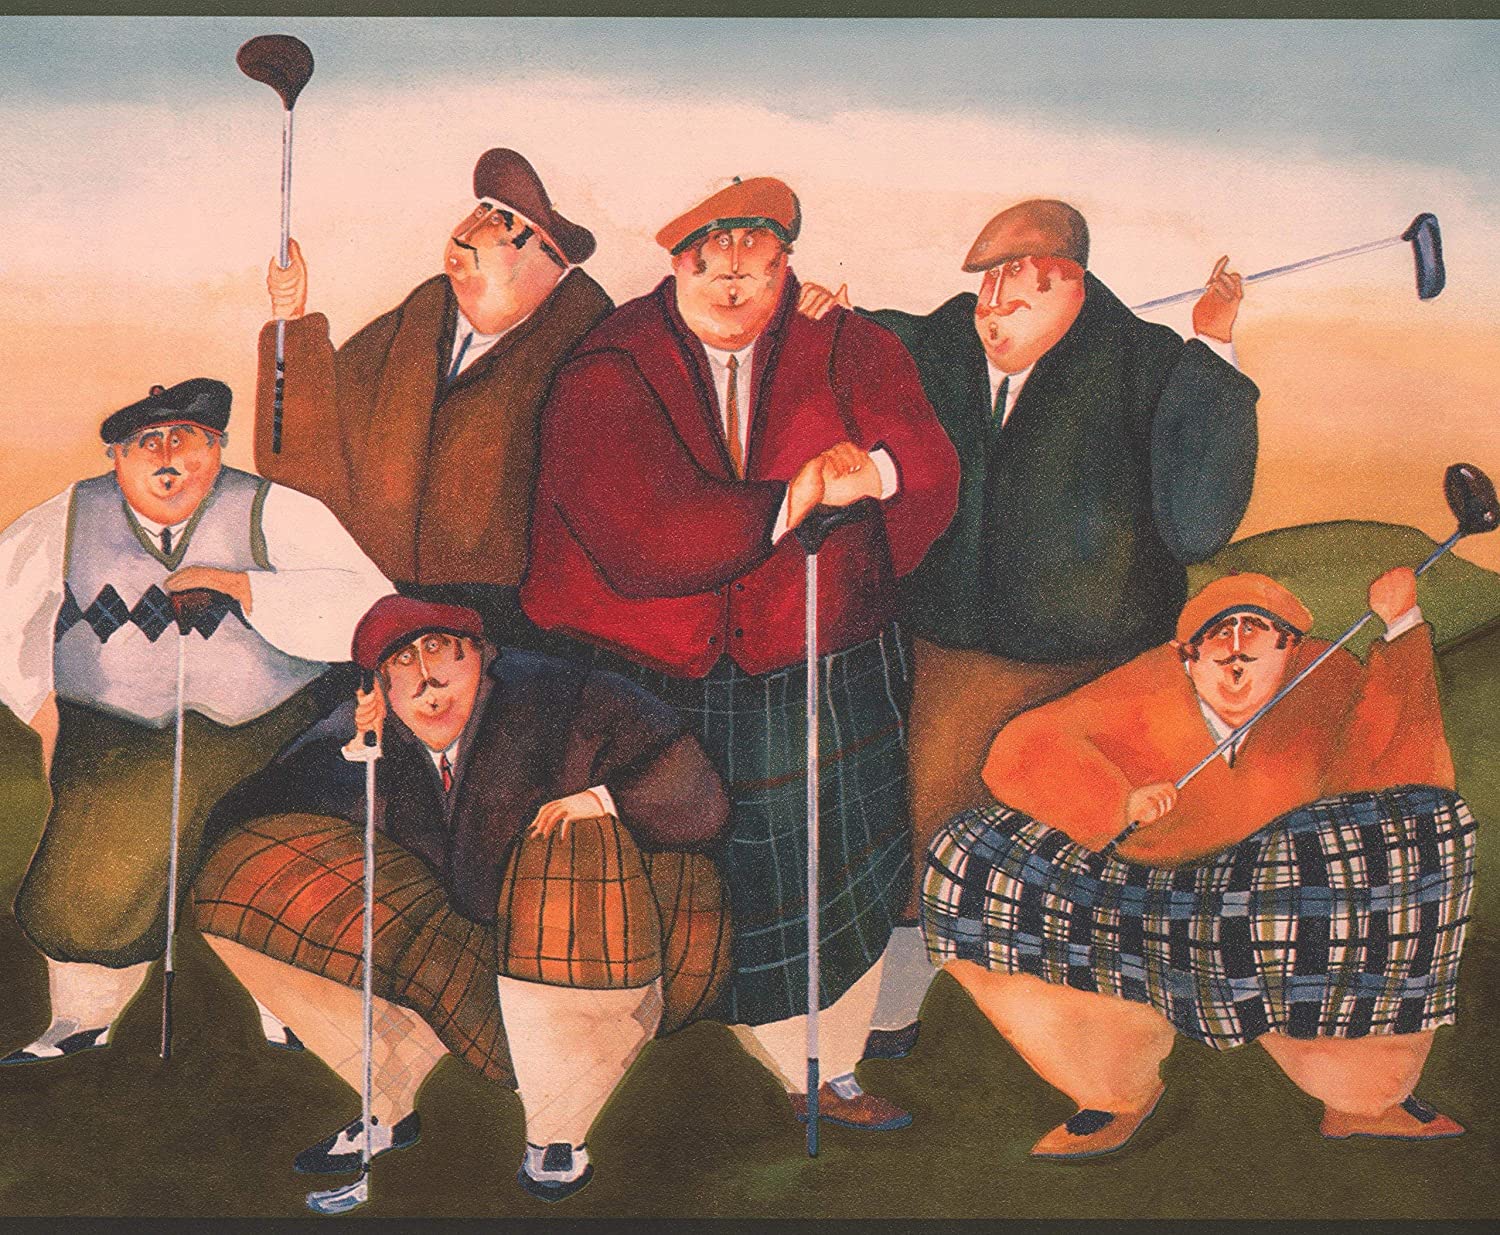 Fat Men with Golf Clubs on the Course Green Trim Wallpaper Border Retro Design, Roll 15' x 10.5''